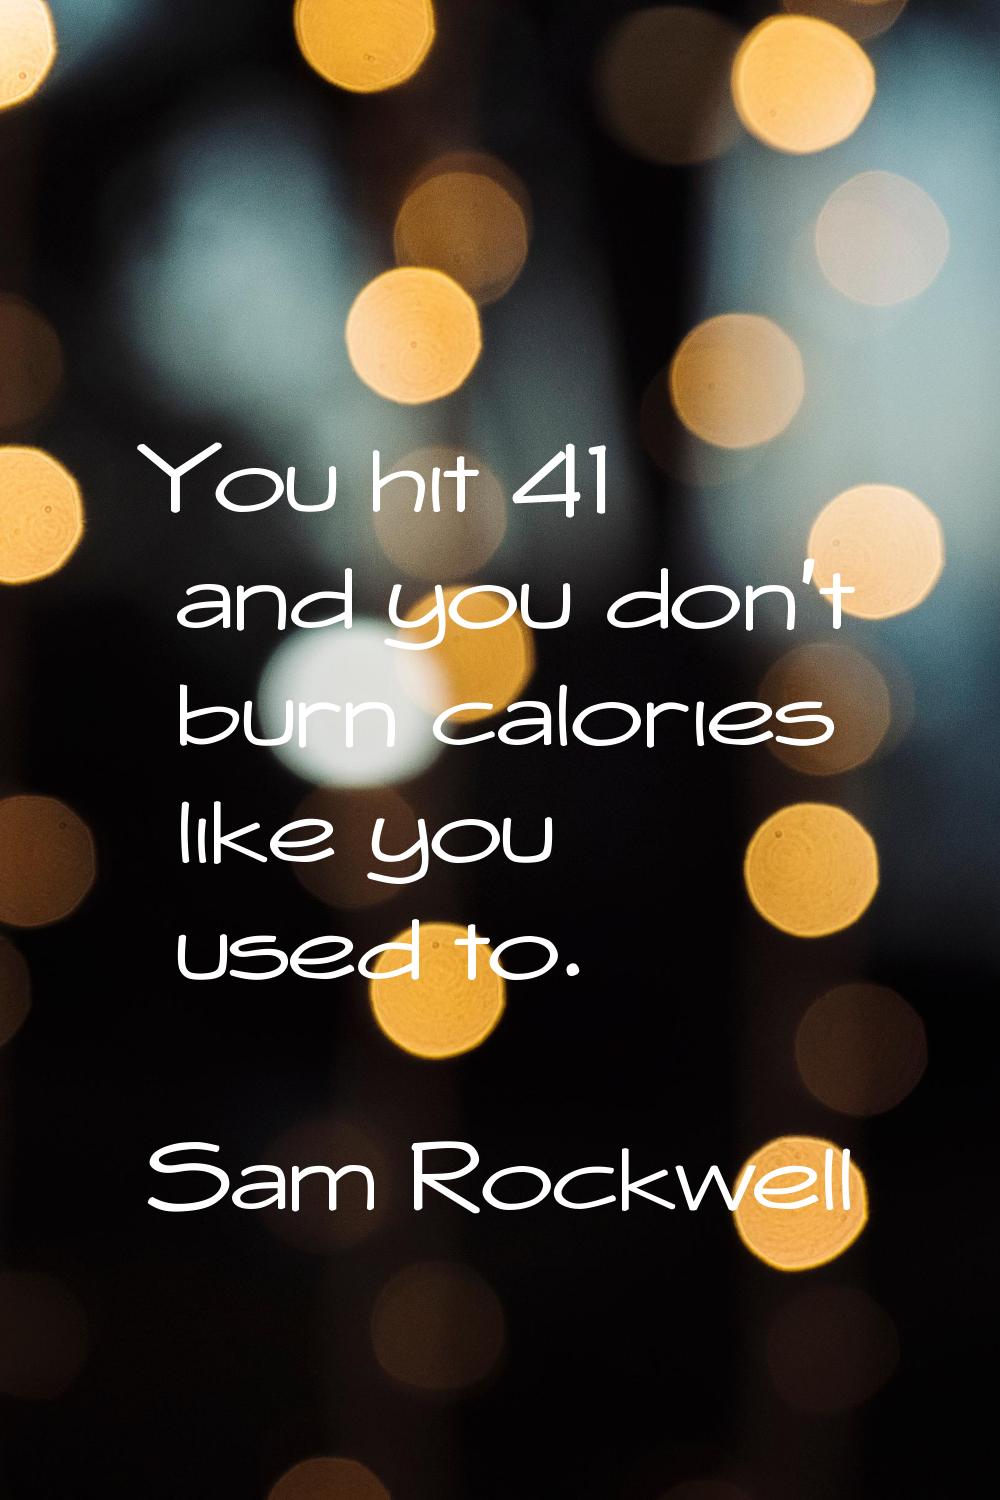 You hit 41 and you don't burn calories like you used to.